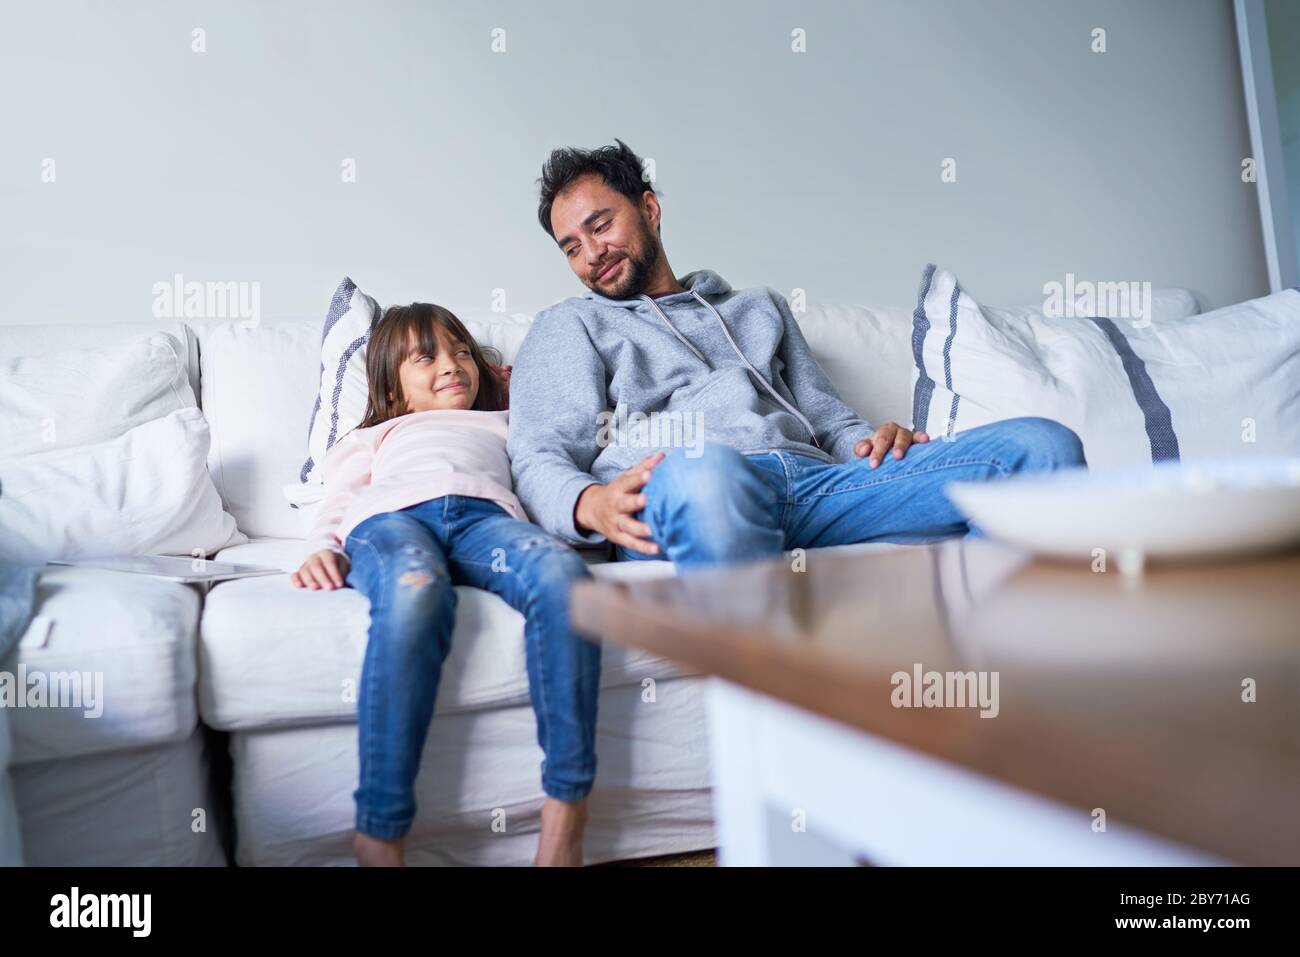 Father and daughter relaxing on living room sofa Stock Photo